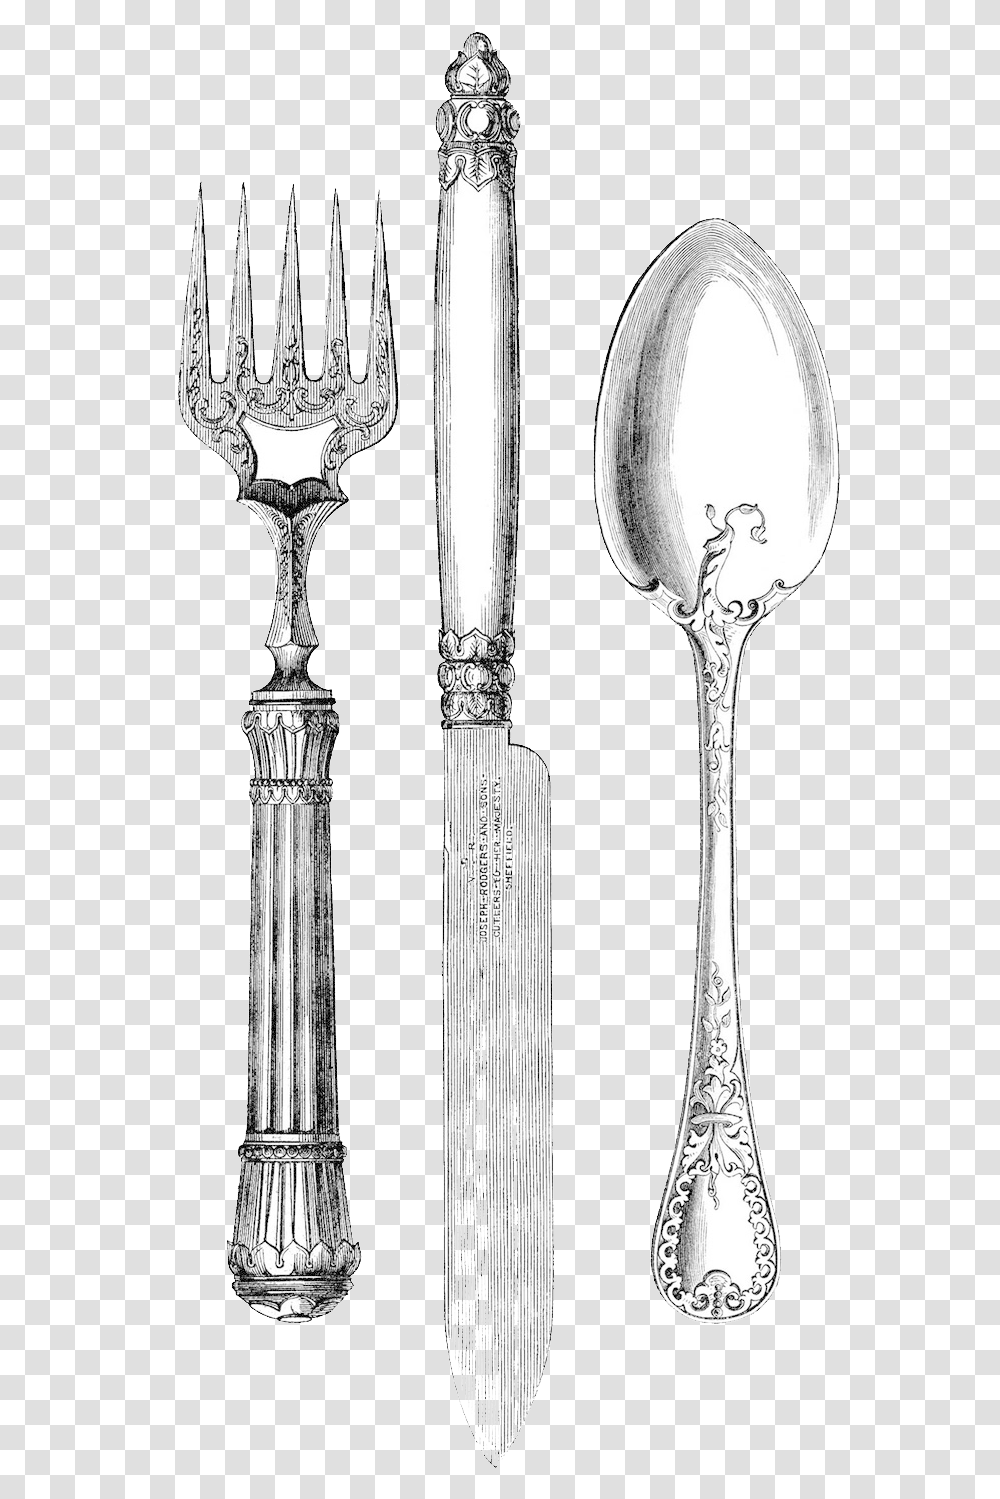 Main Dishes The Pure Fancy Fork And Knife, Spoon, Cutlery Transparent Png